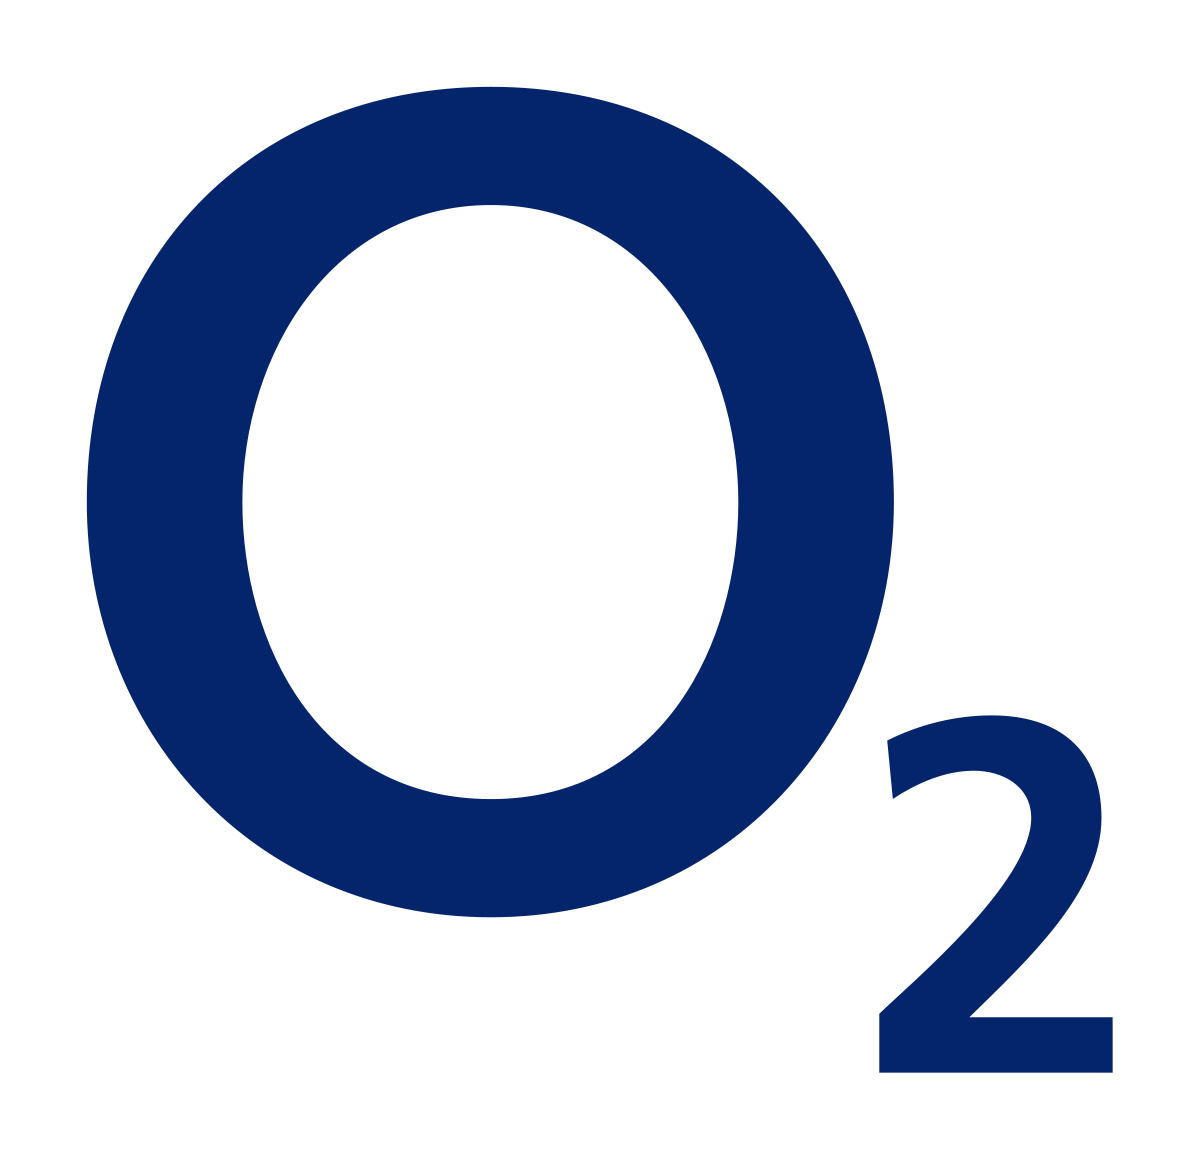 O2 20GB DATA + Unlimited calls and SMS.